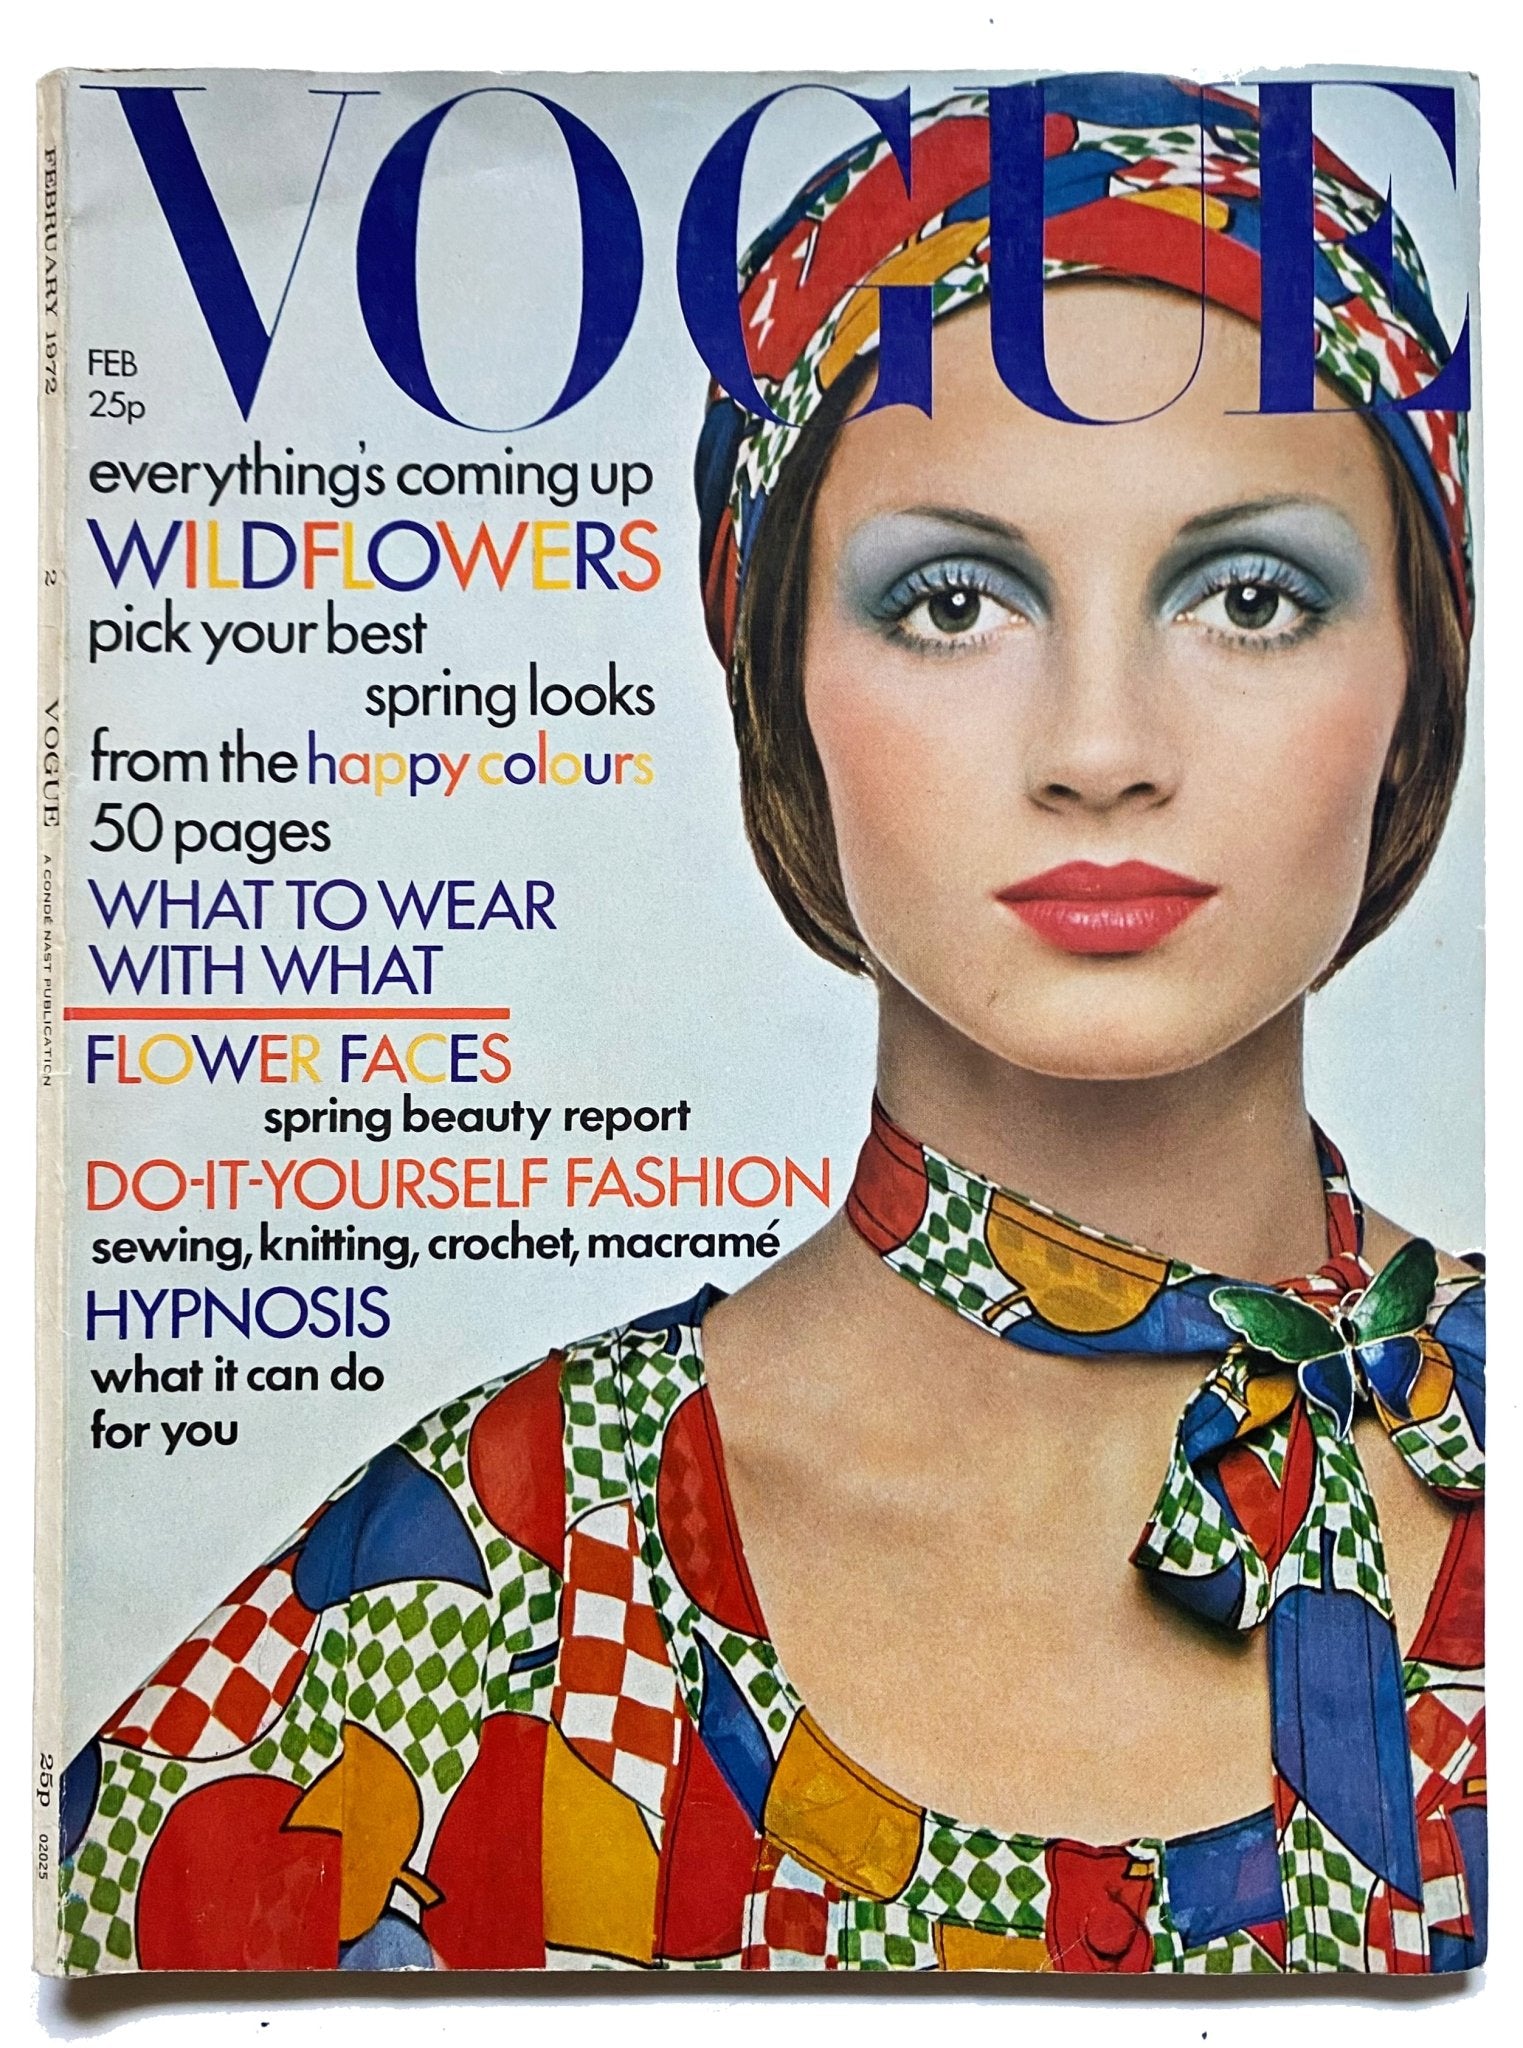 1972 Vogue - "Happy Colours" - Cover by Barry Lategan - style - CHNGR